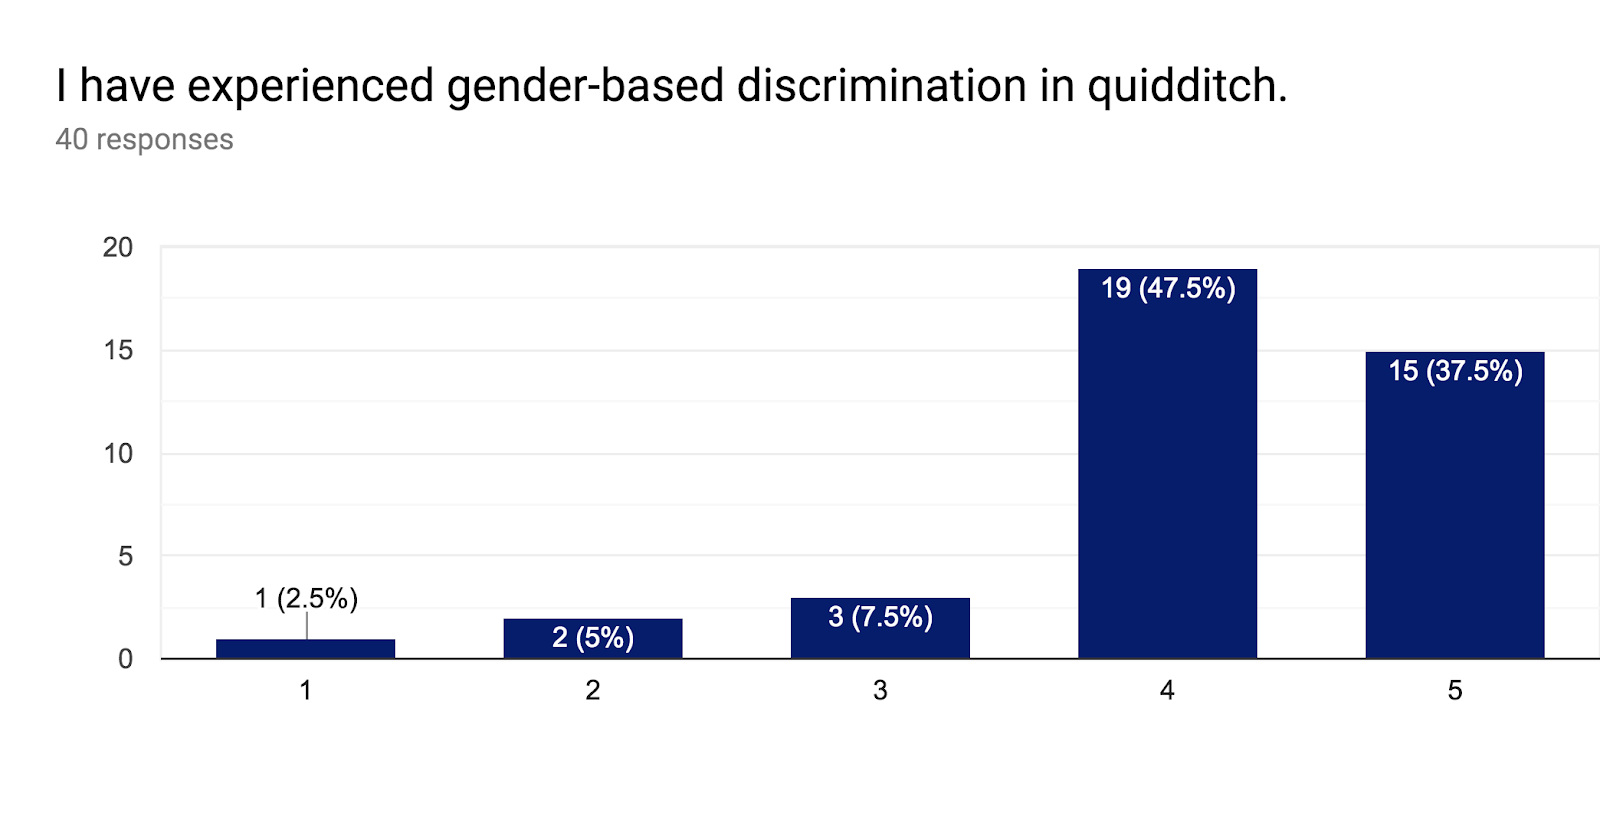 Forms response chart. Question title: I have experienced gender-based discrimination in quidditch. . Number of responses: 40 responses.